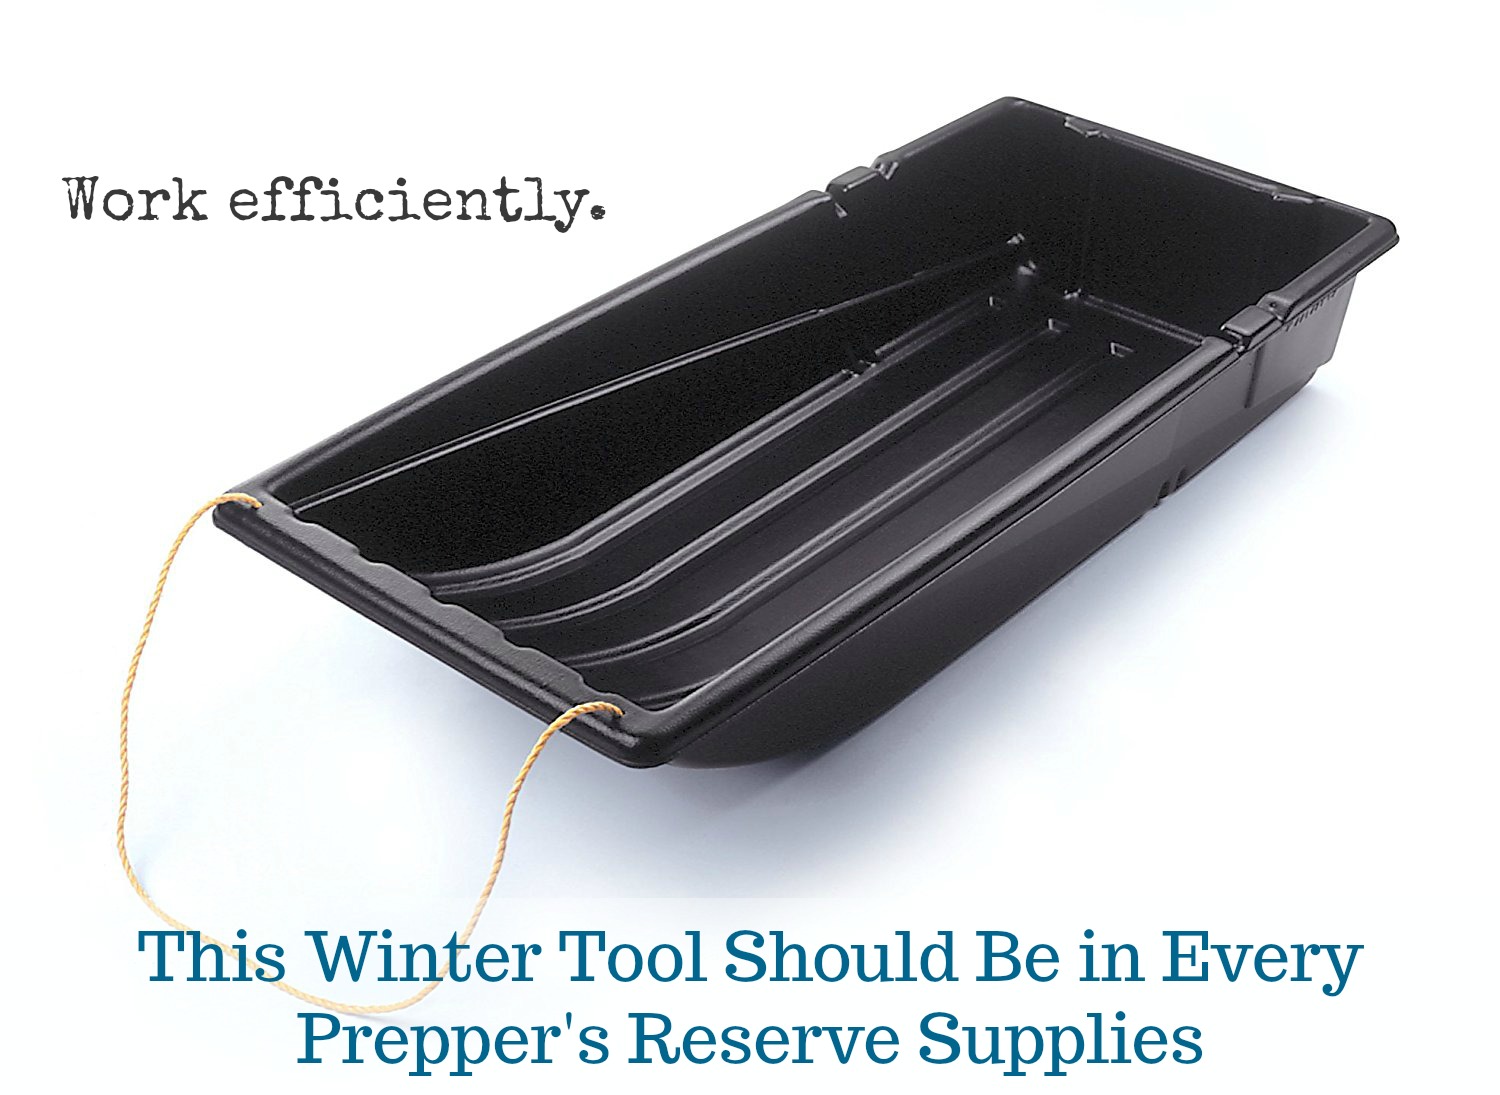 This Winter Tool Should Be In Every Prepper’s Reserve Supplies